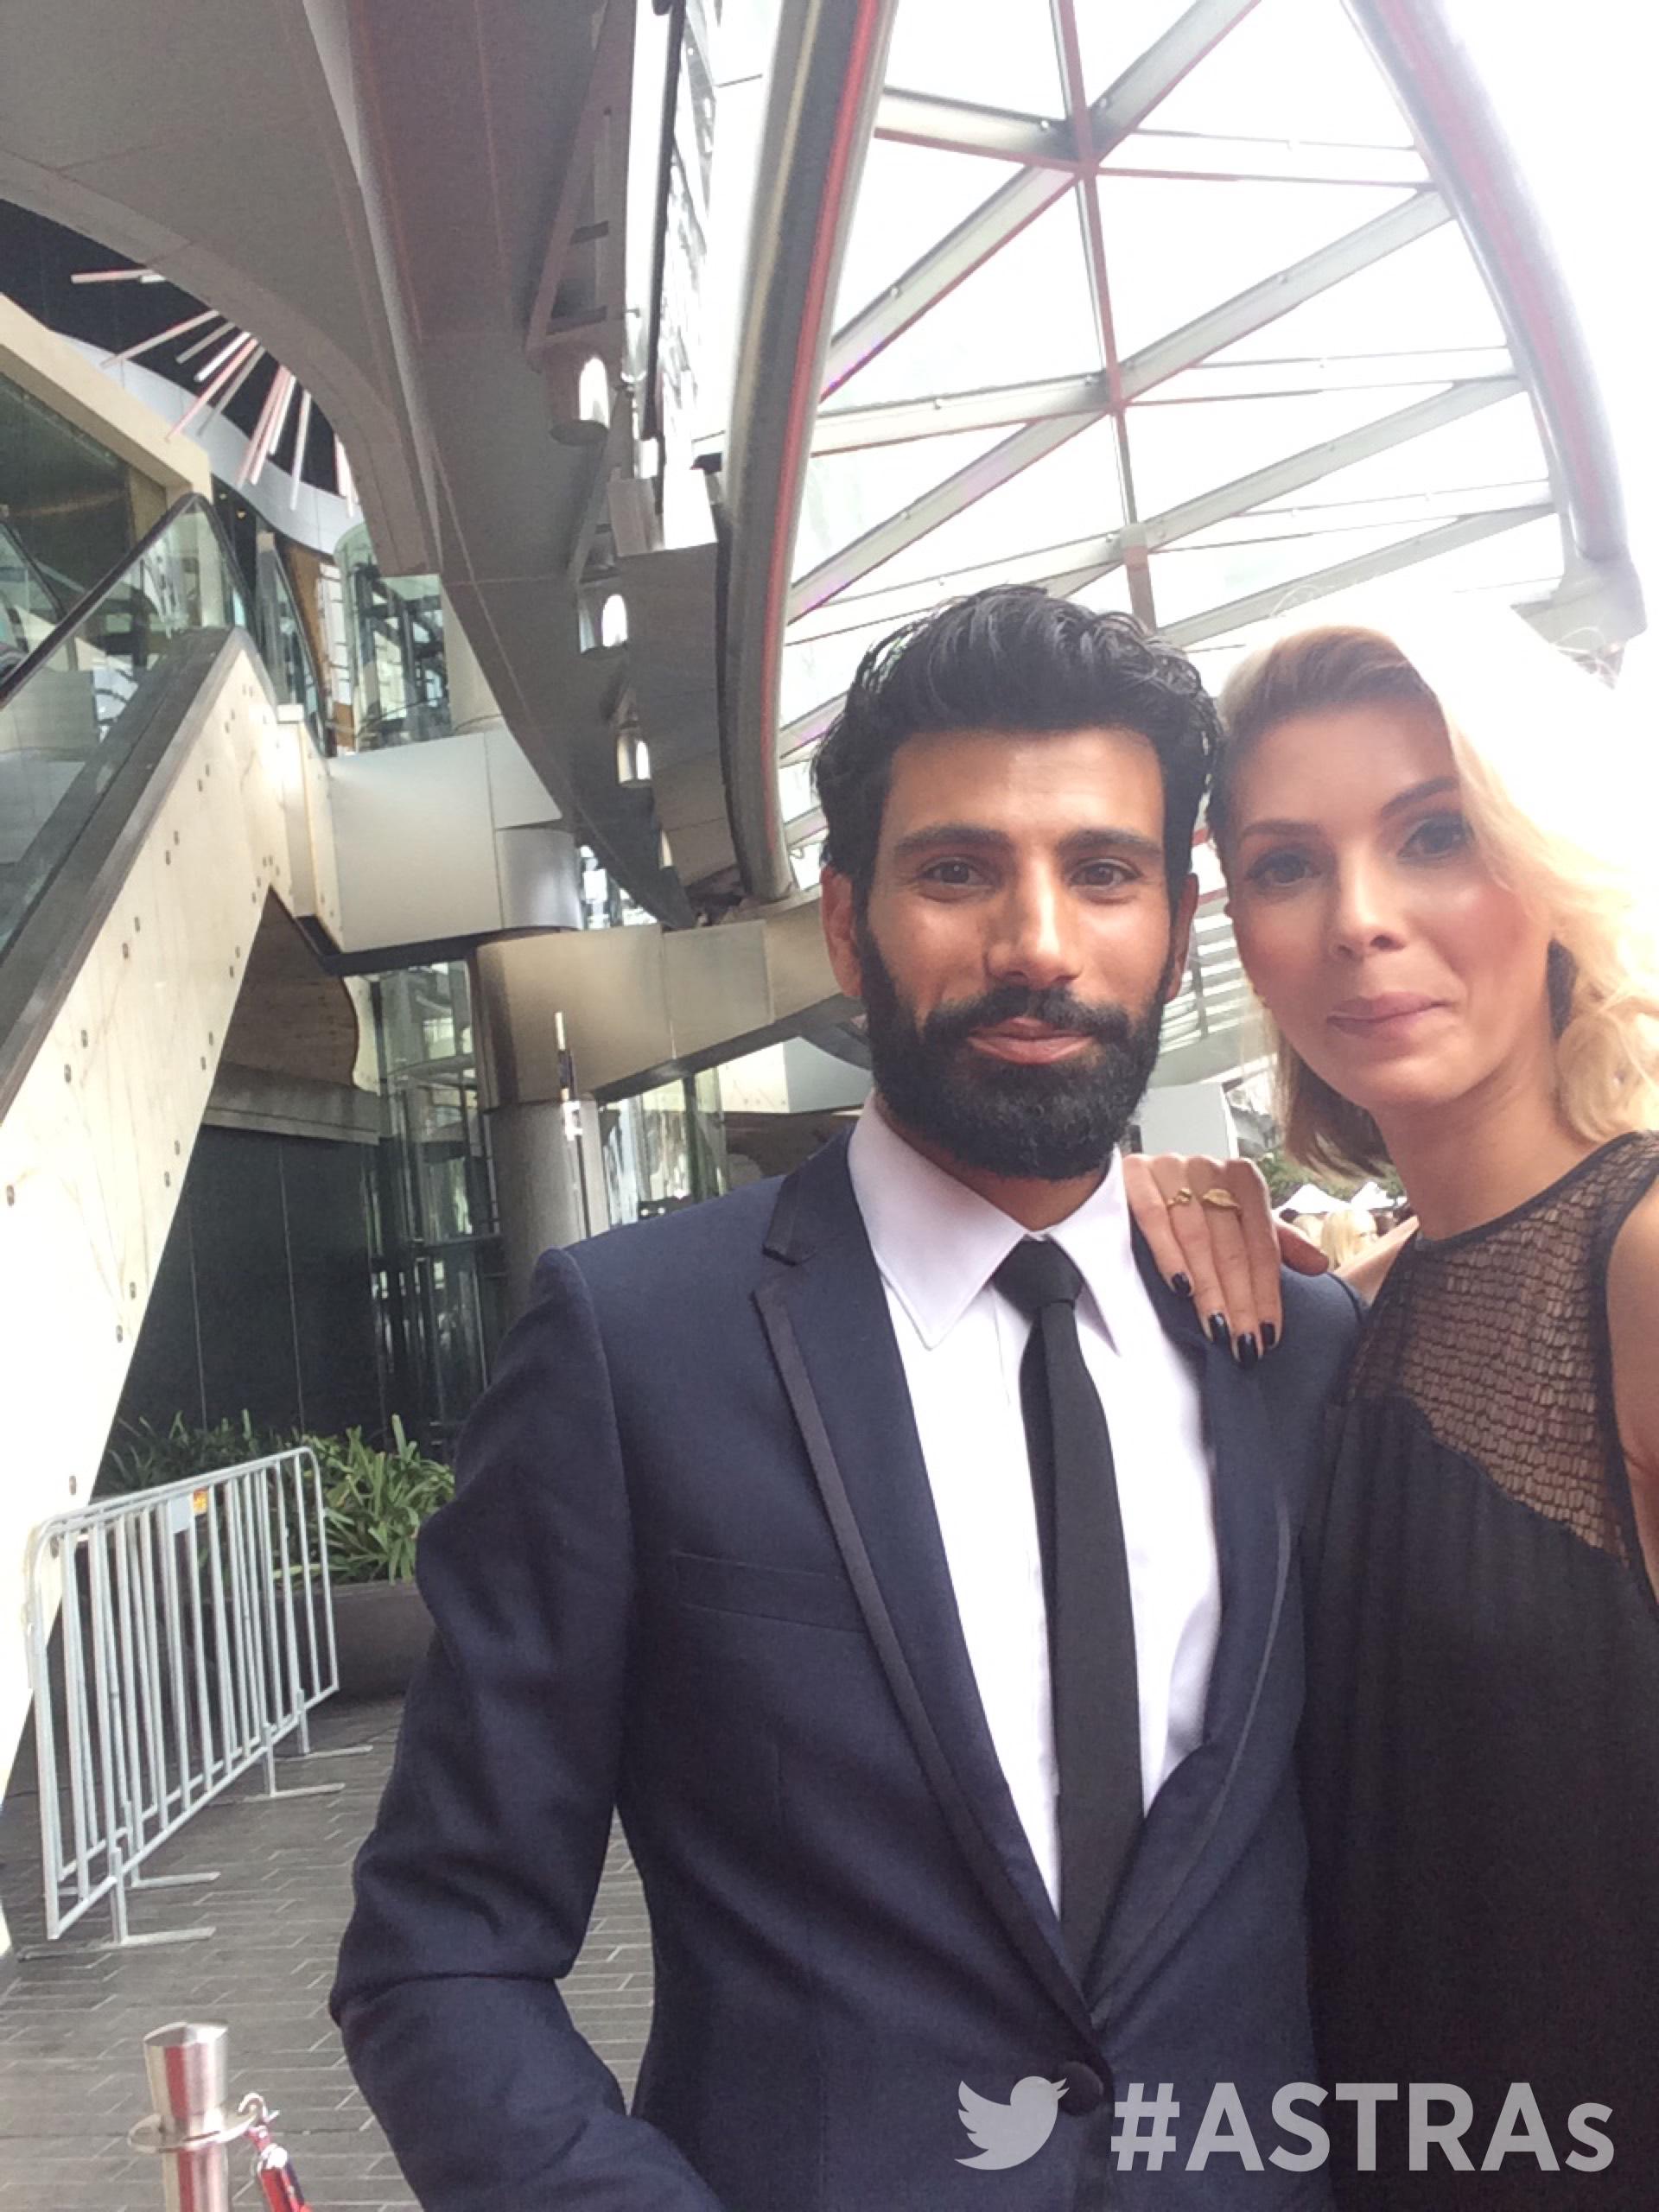 2015 Awards on Twitter: "#ASTRAs red carpet @abbyearl_ and Aldo Mignone from @aptch7 on @sohotvau http://t.co/11q1iajAMp" / Twitter